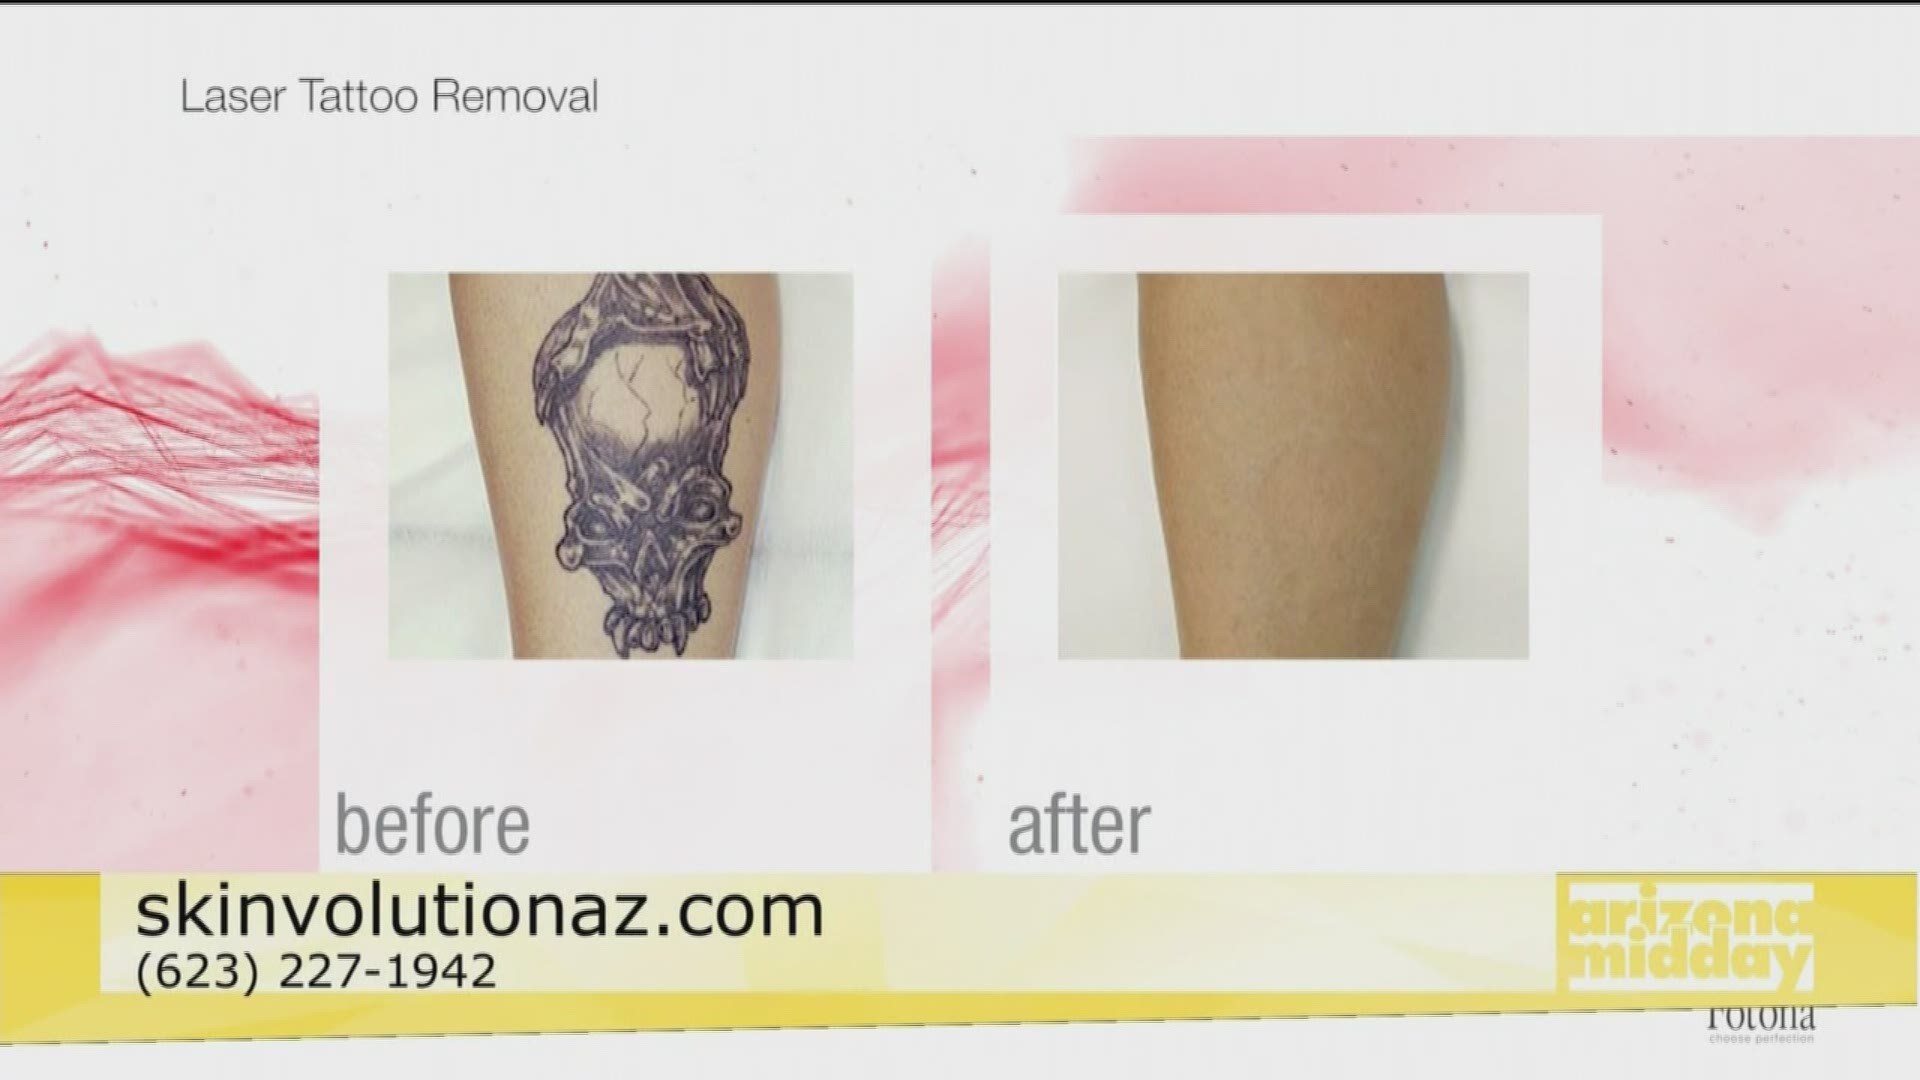 Dr. Trupti K Patel tells us about tattoo removal with Skinvolution.